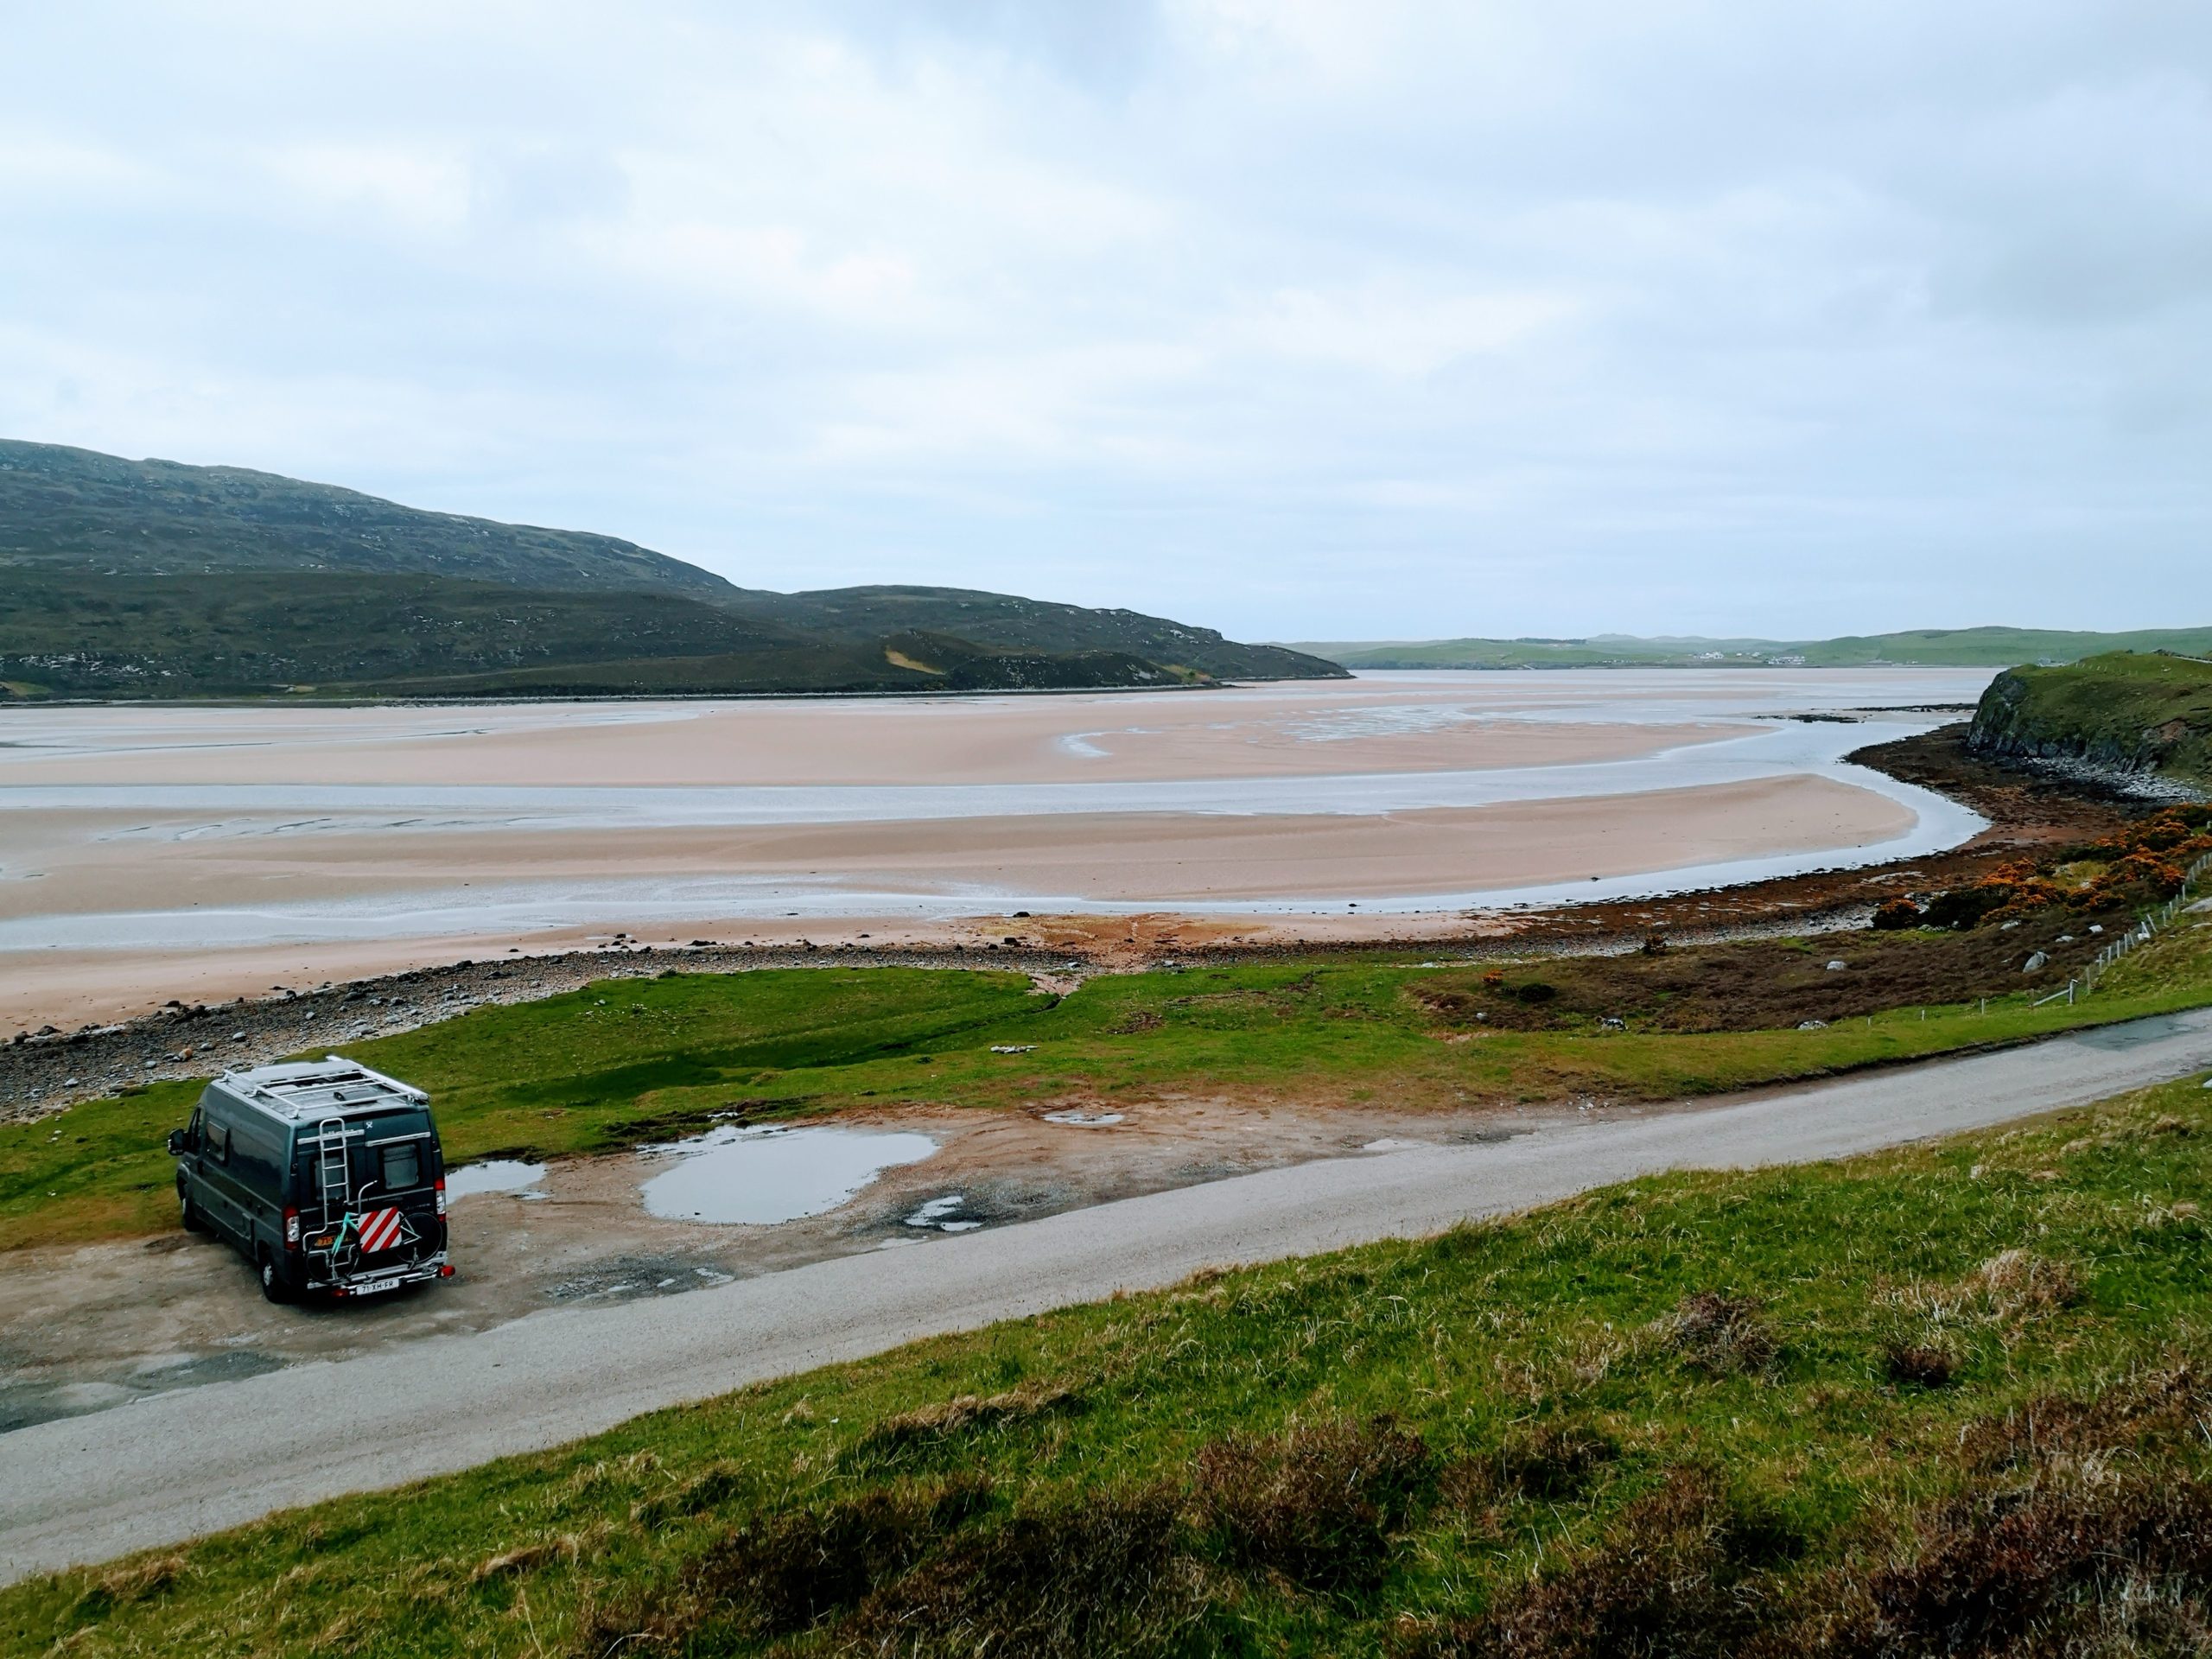 Wild camping at Kyle of Durness